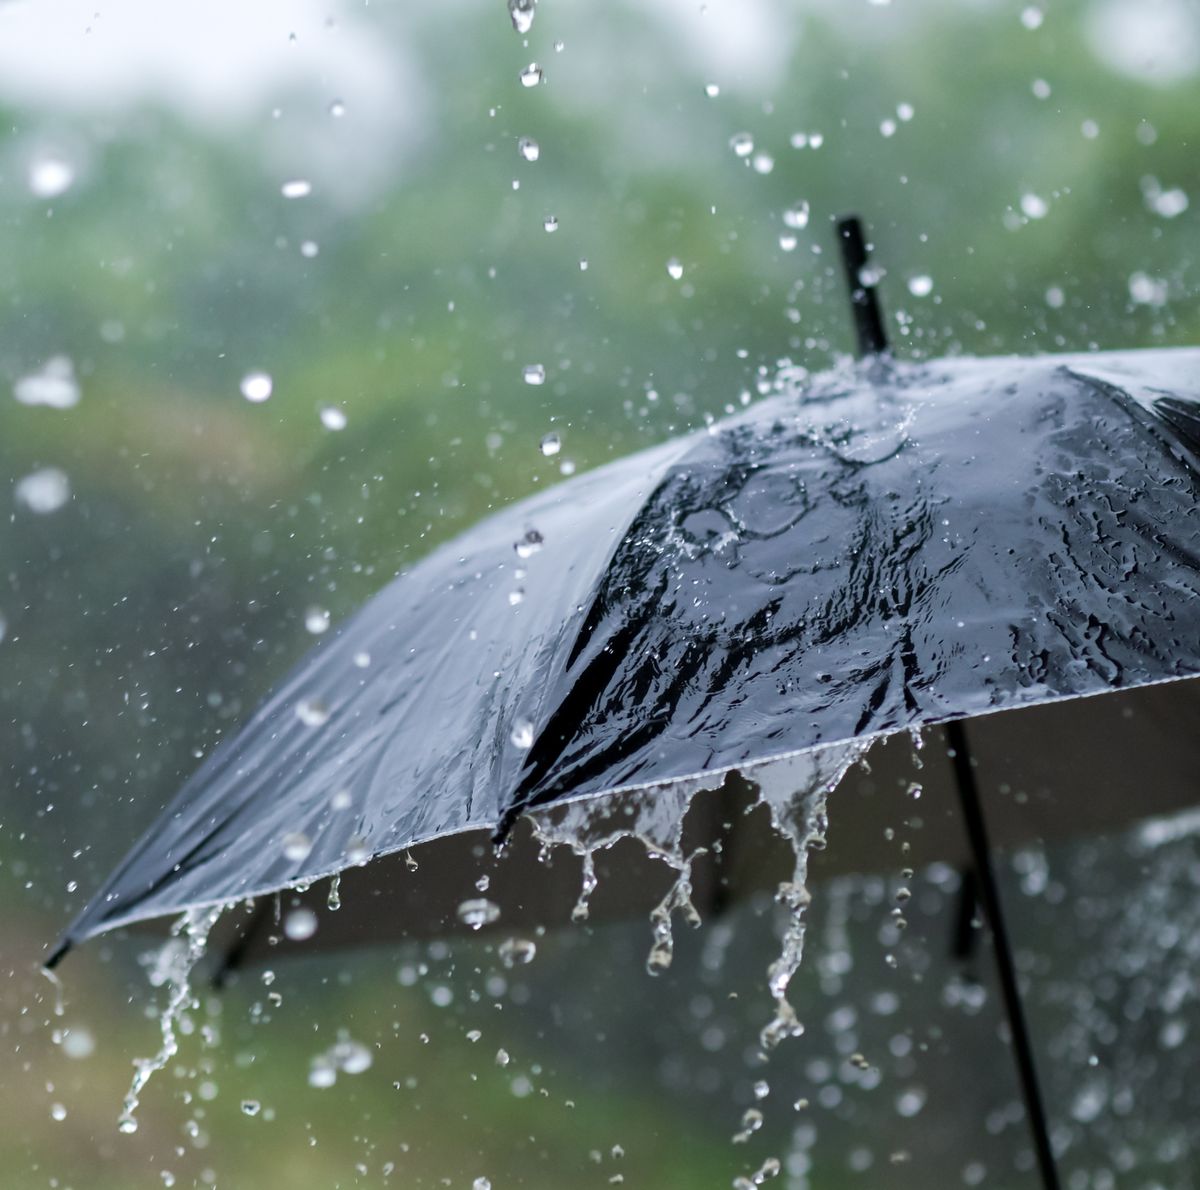 Rainwater Is No Longer Safe to Drink, Study Says